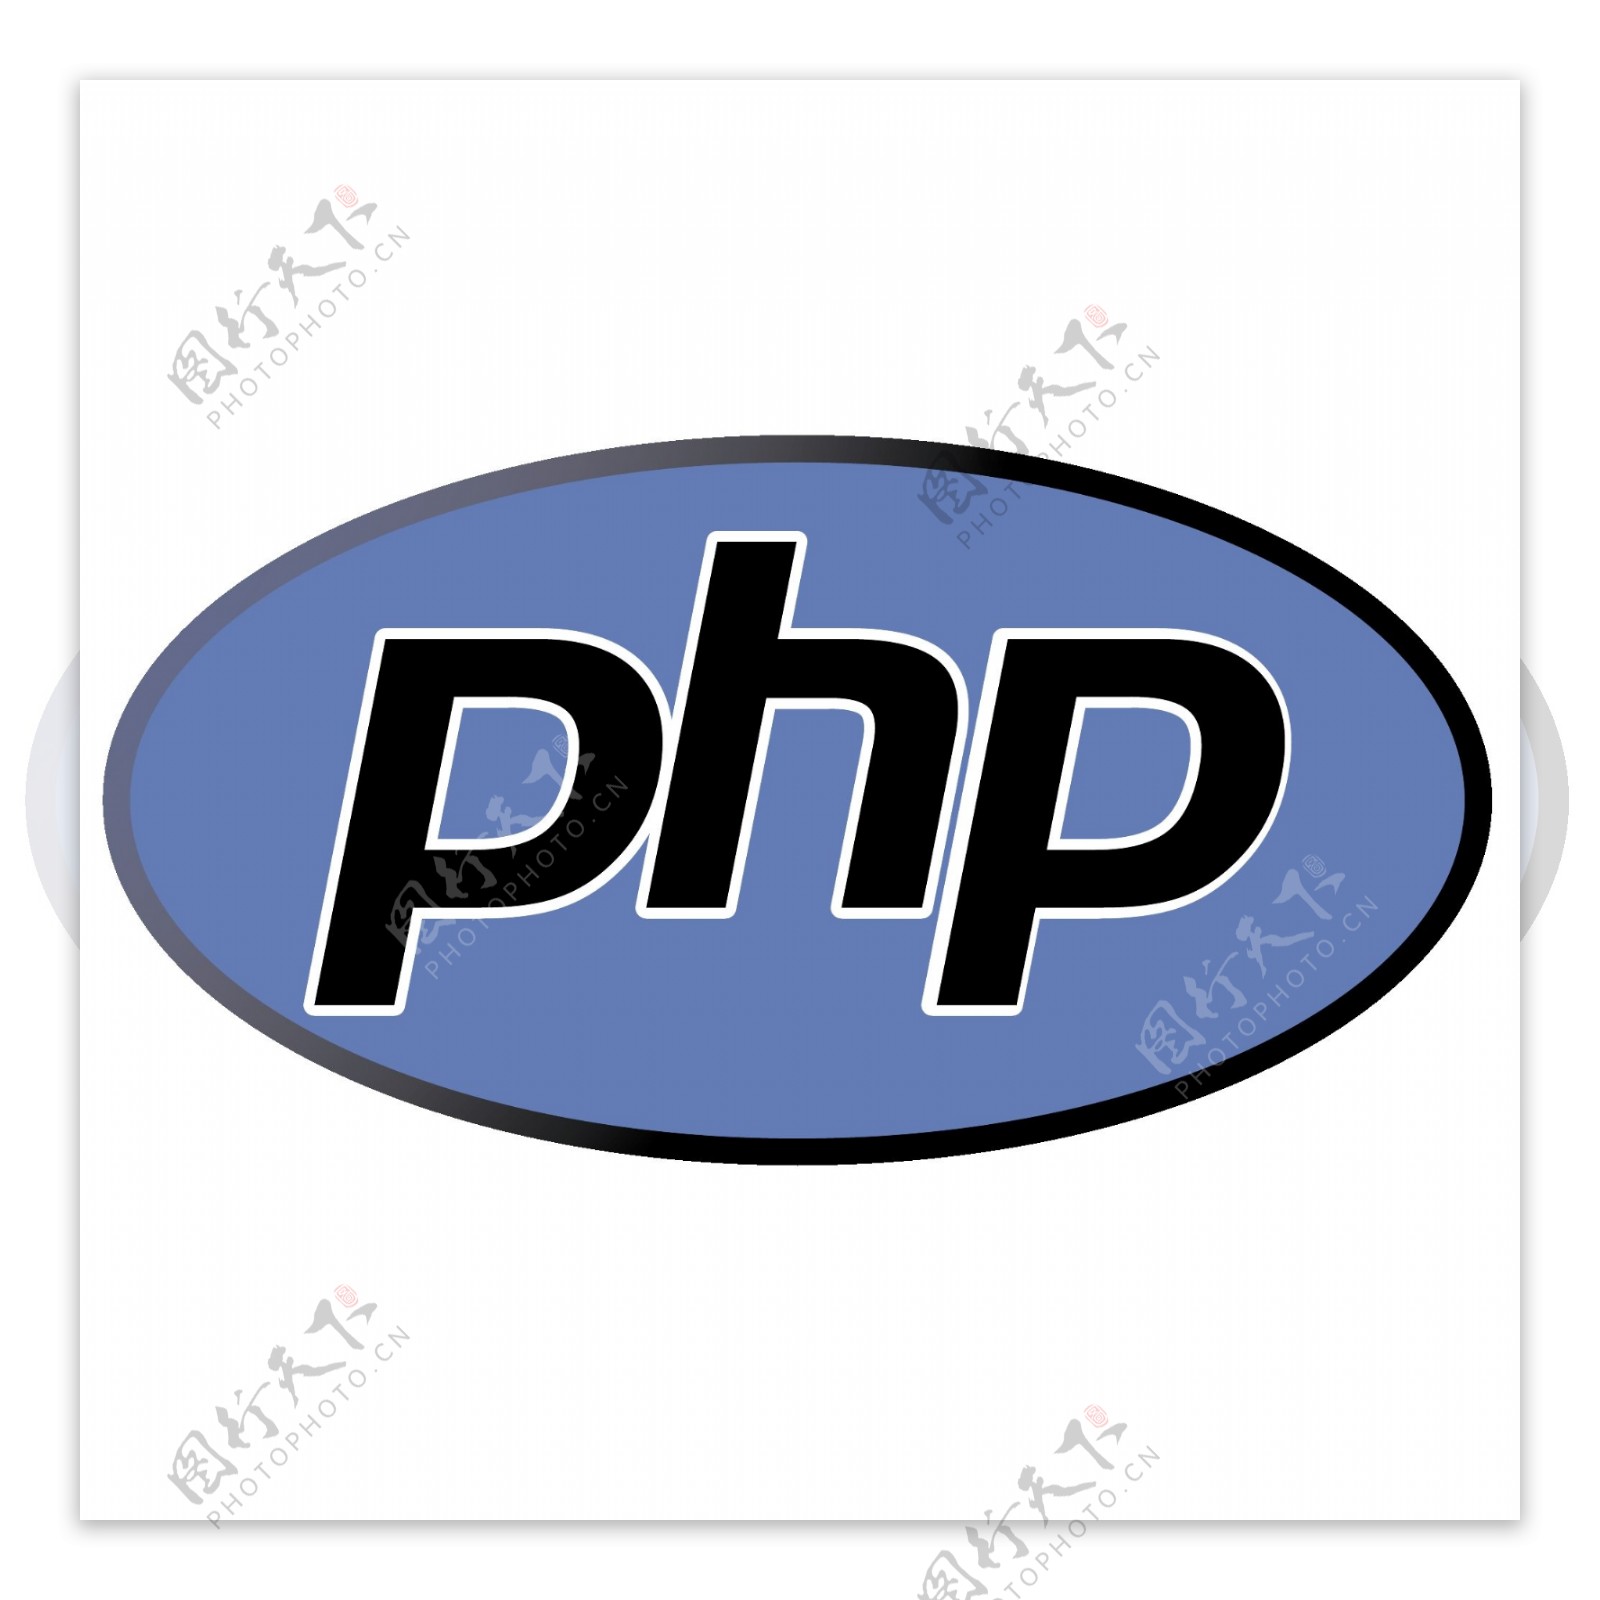 PHP0